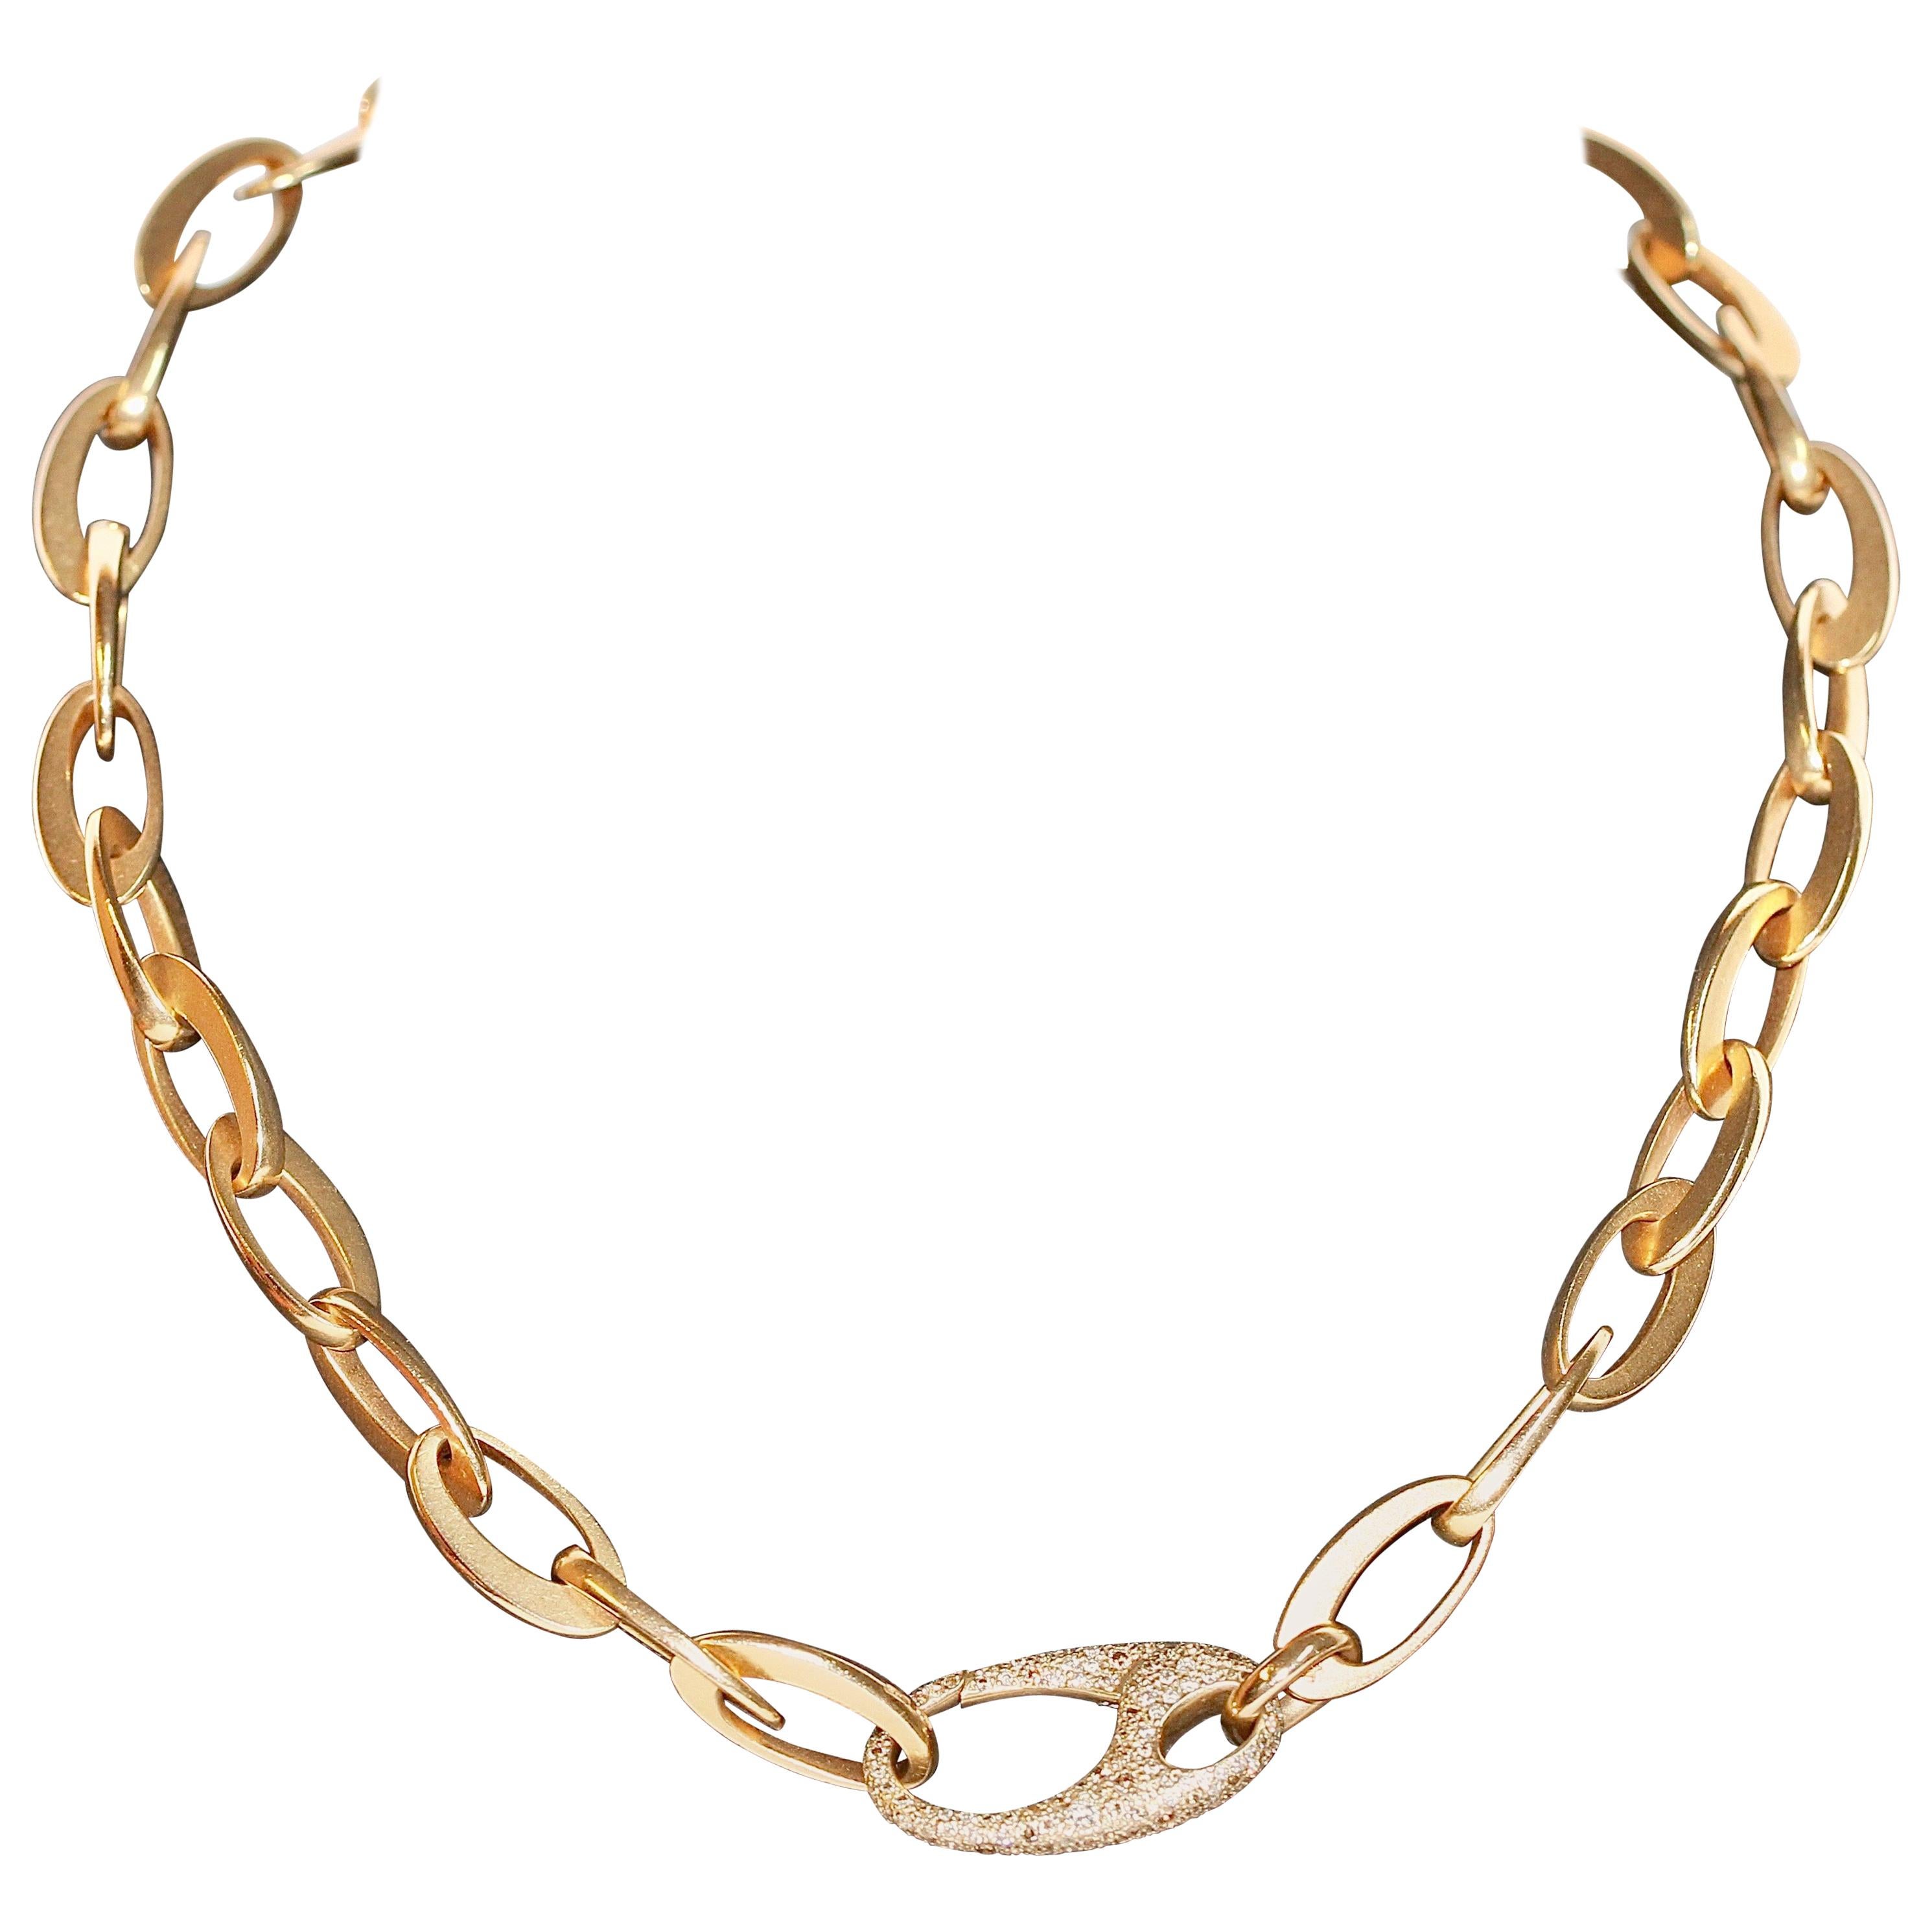 Beautiful Designer Chain Necklace from Pomellato, 18k Rose Gold with Diamonds